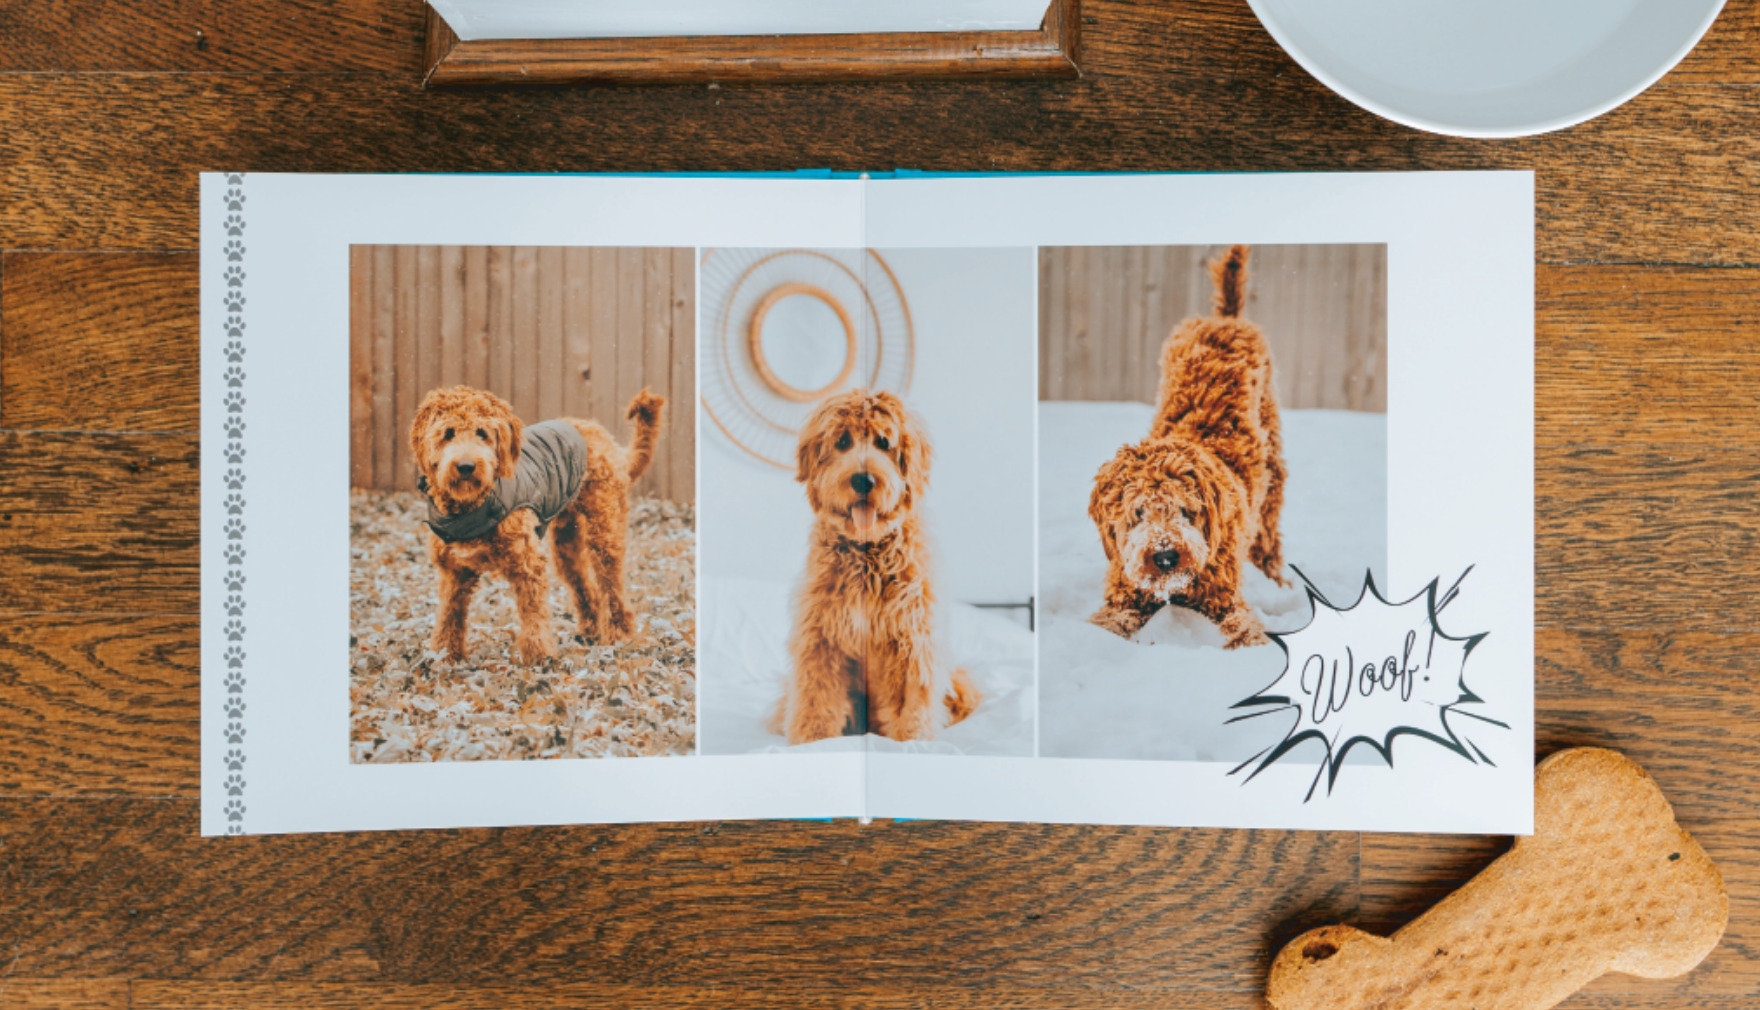 Dog photo book laying open on a table